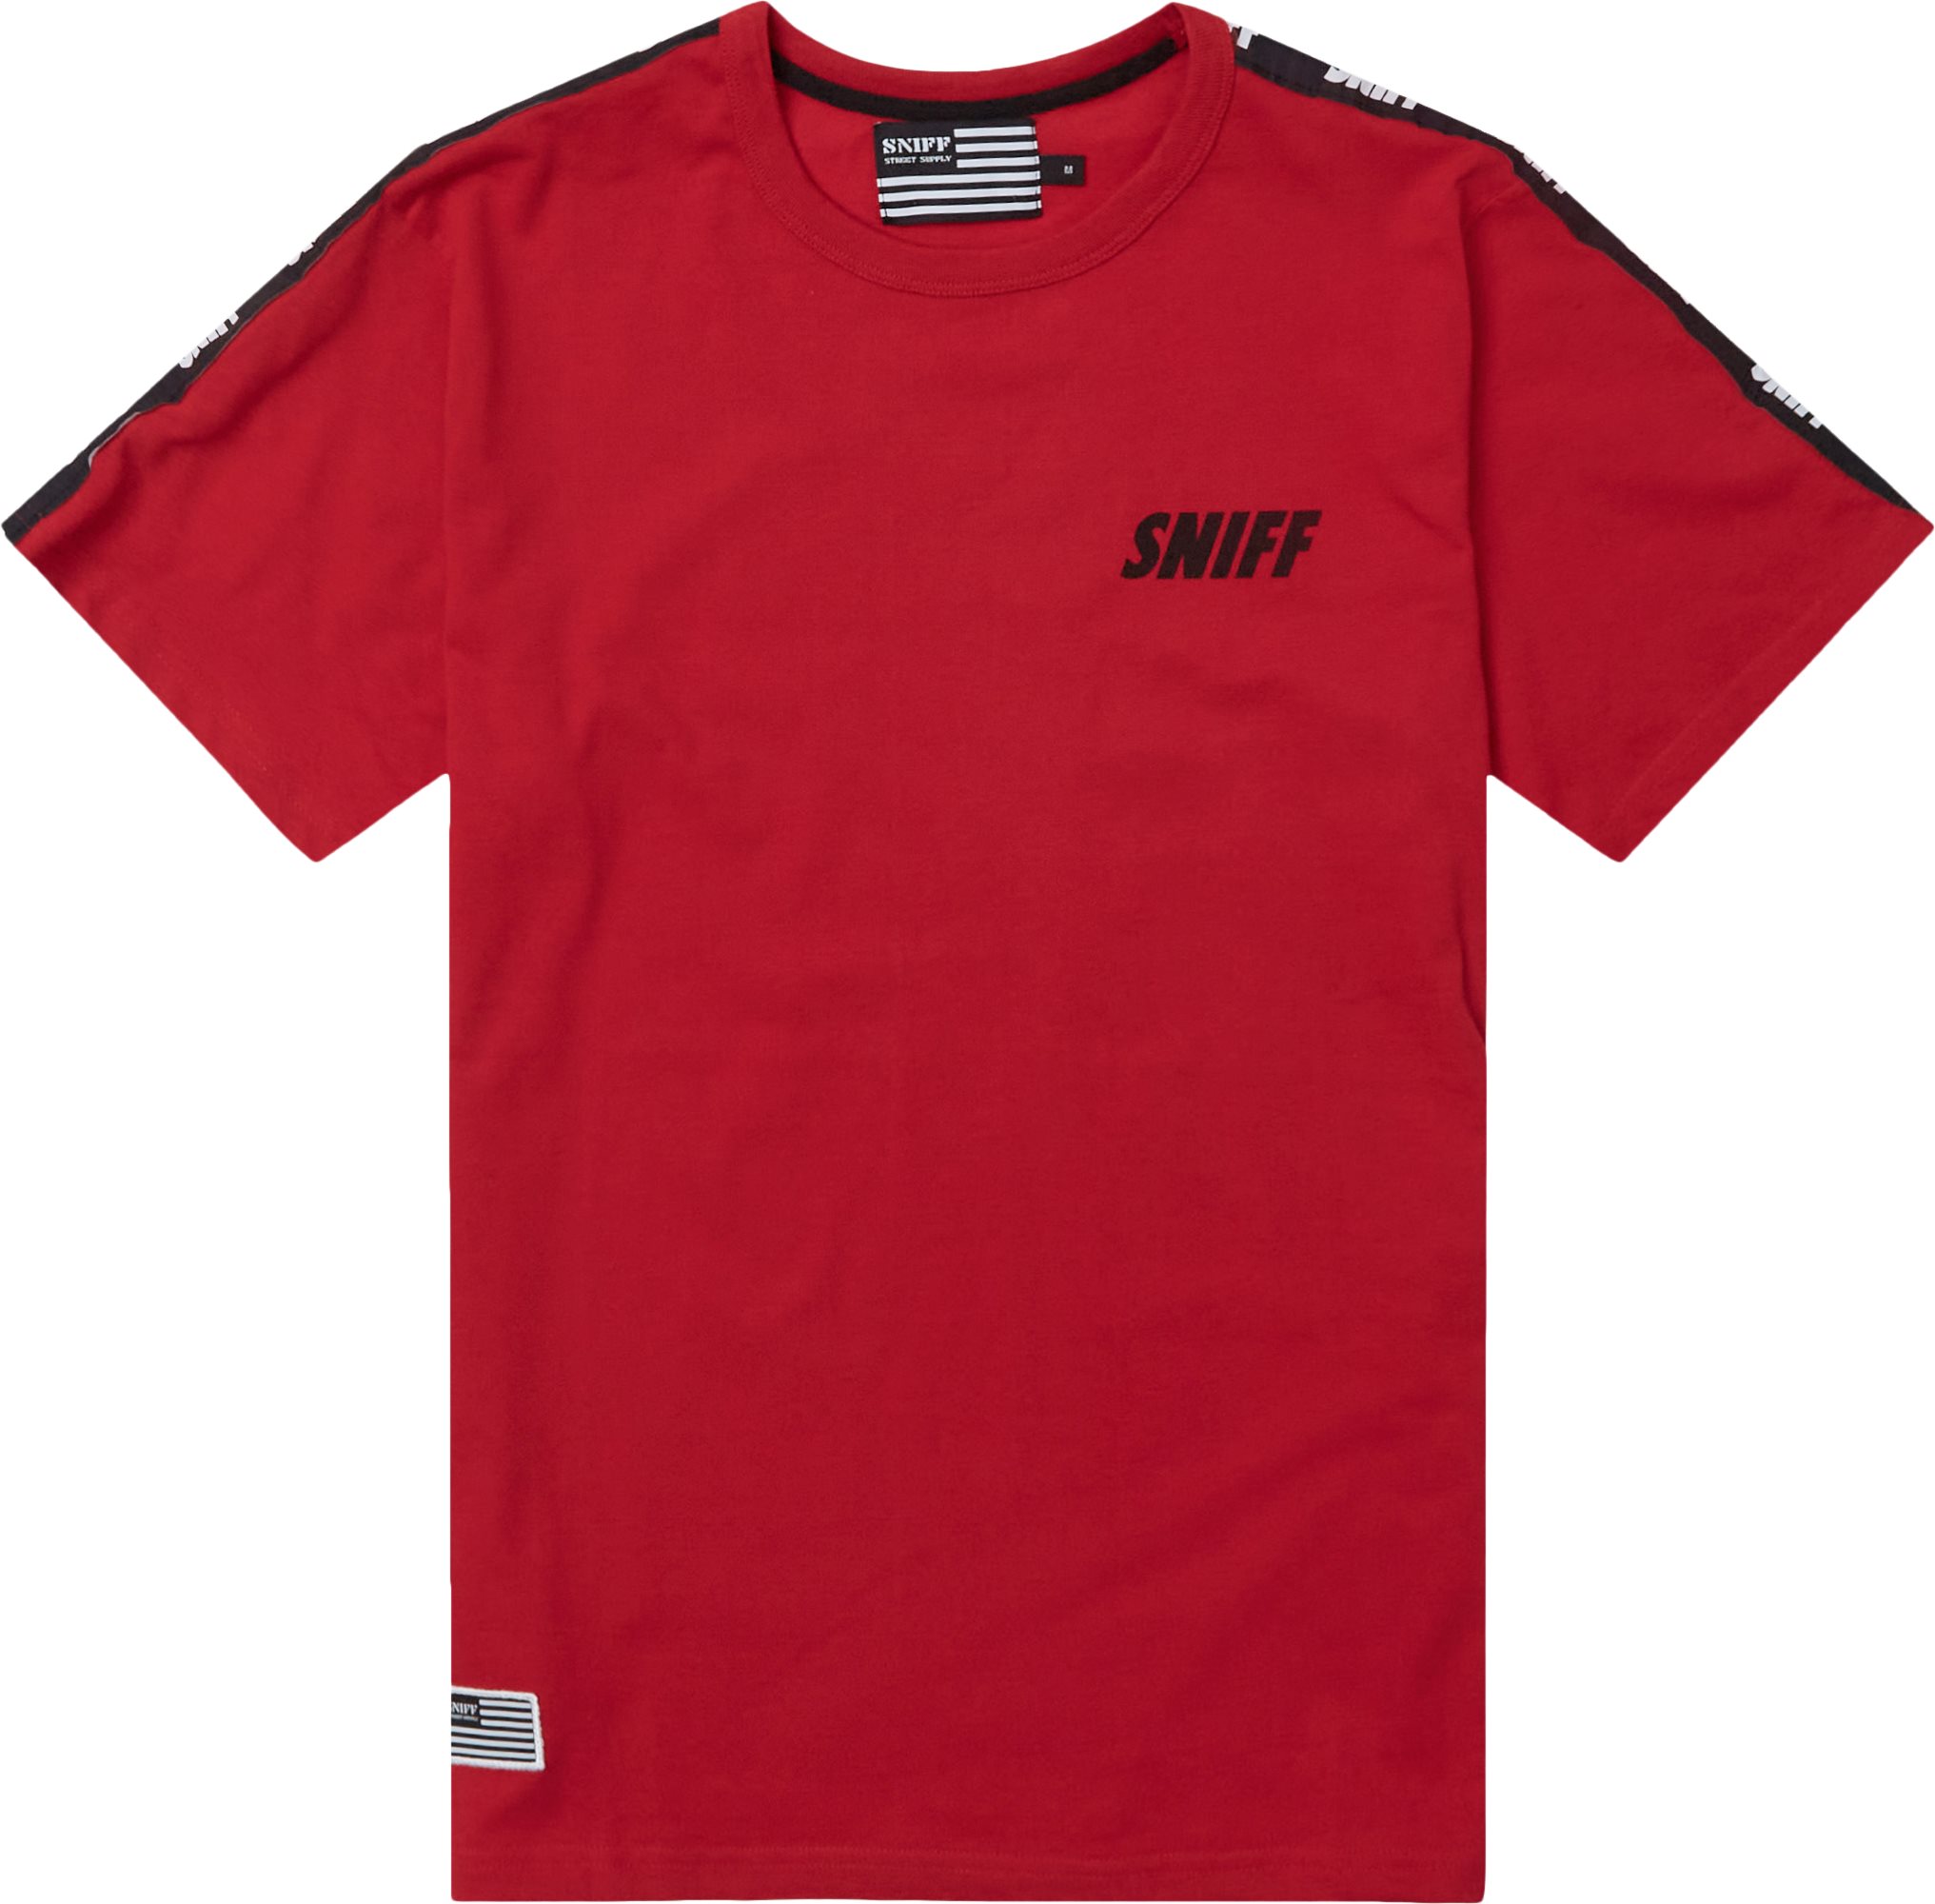 Pointe Tee - T-shirts - Regular fit - Red